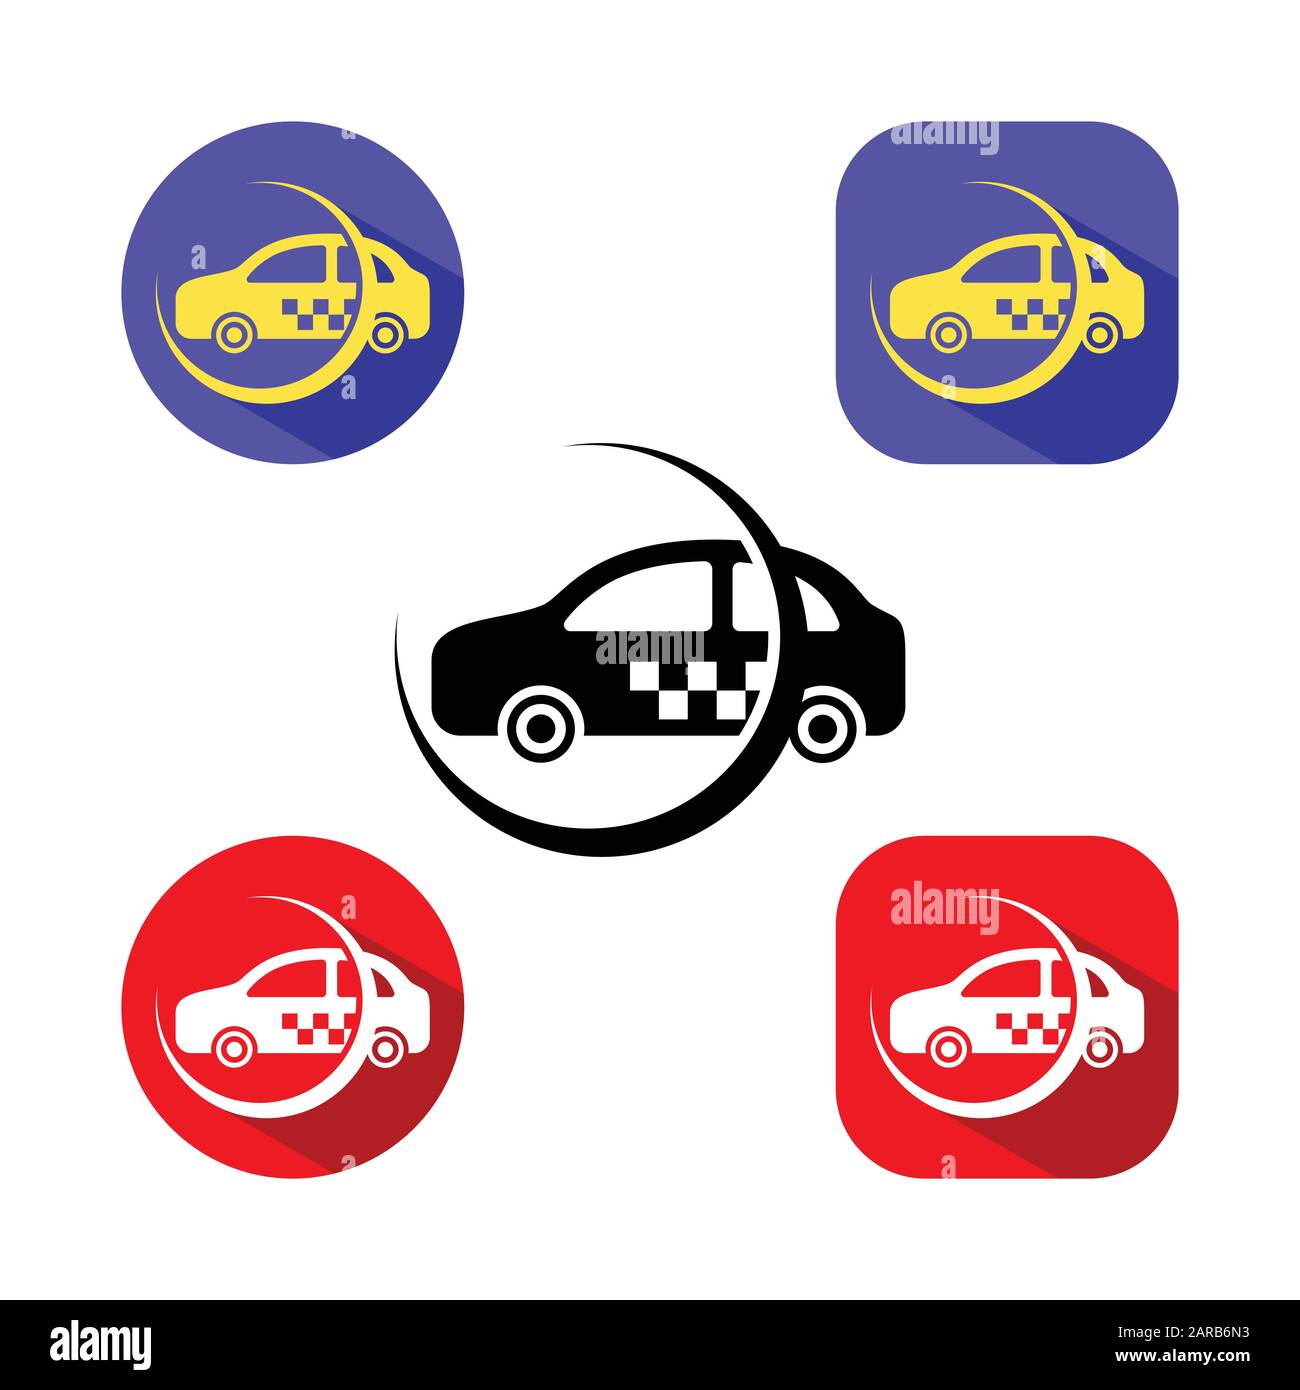 Taxi car sign icon. Public transport symbol, taxi icon in trendy flat design Stock Vector